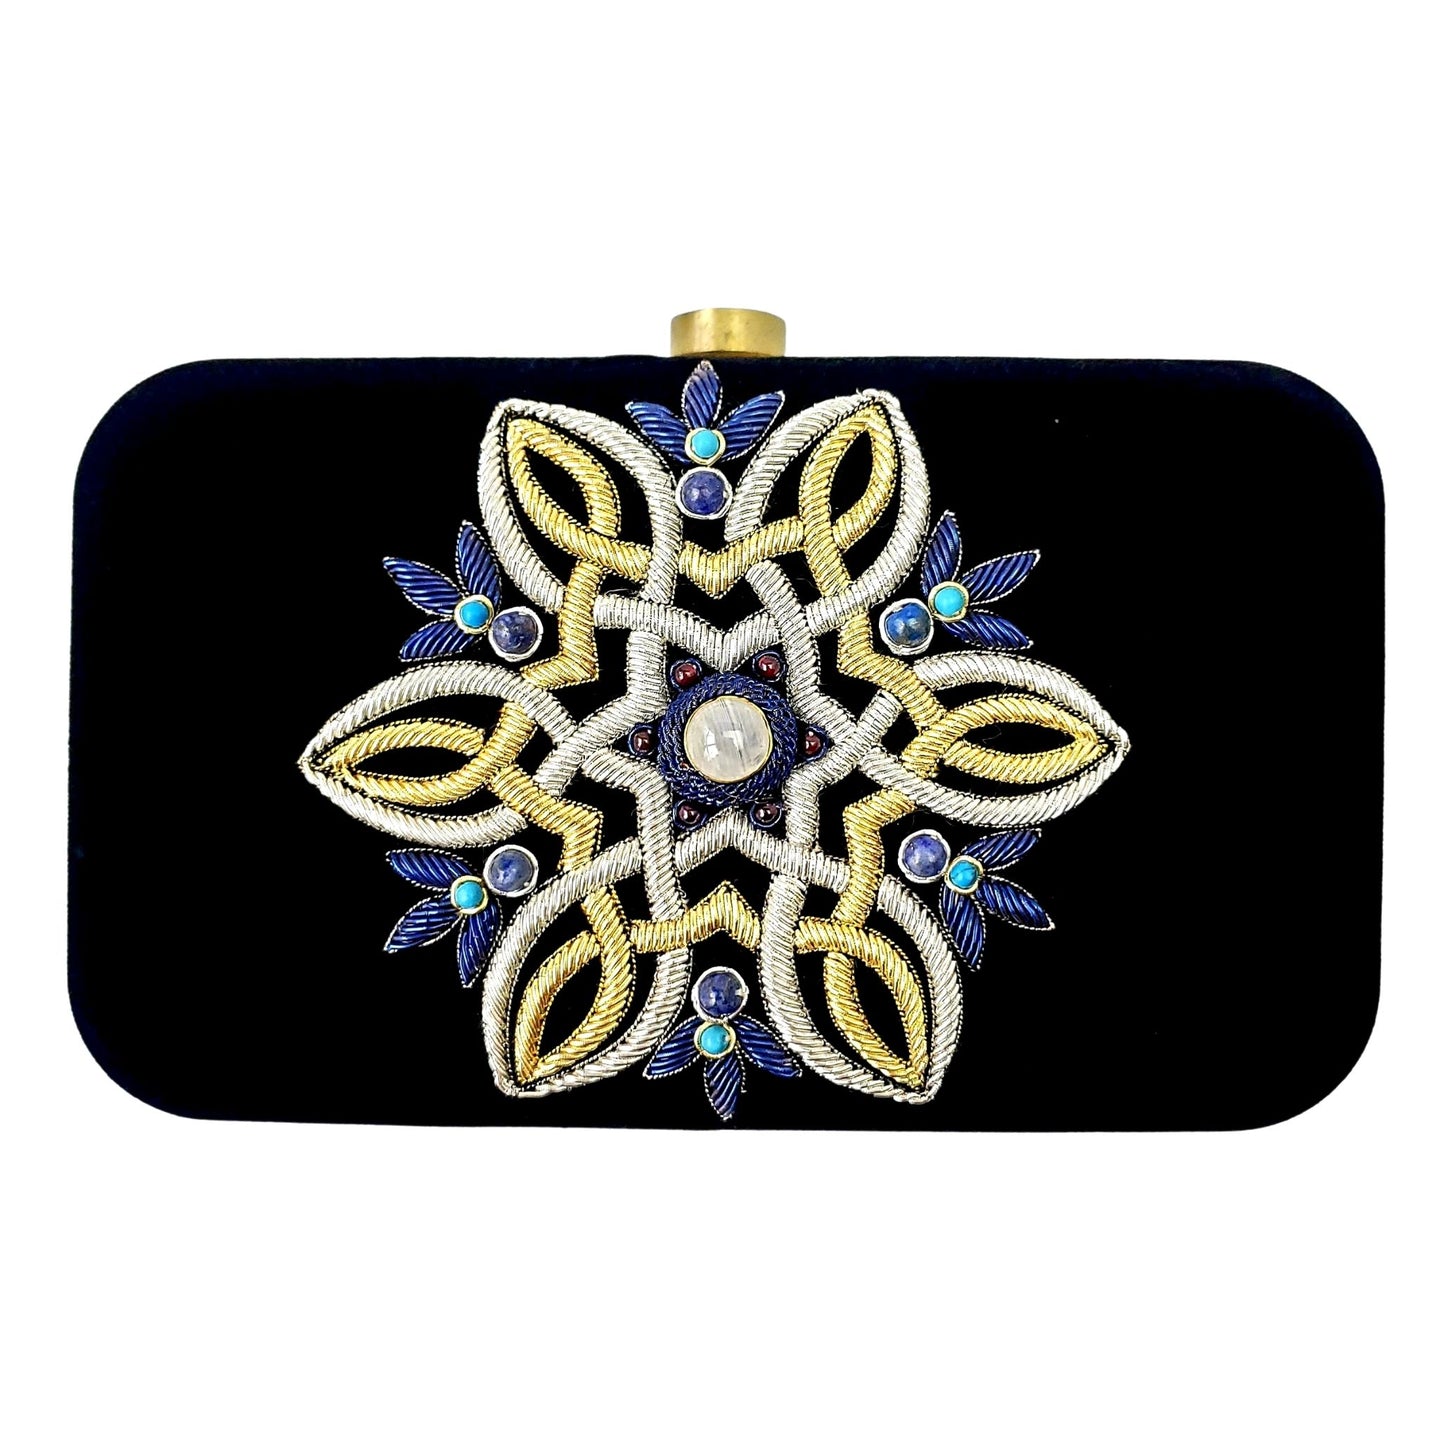 Luxury black velvet hard case clutch bag hand embroidered with gold and silver medallion and inlaid with lapis lazuli stones, zardozi purse. 